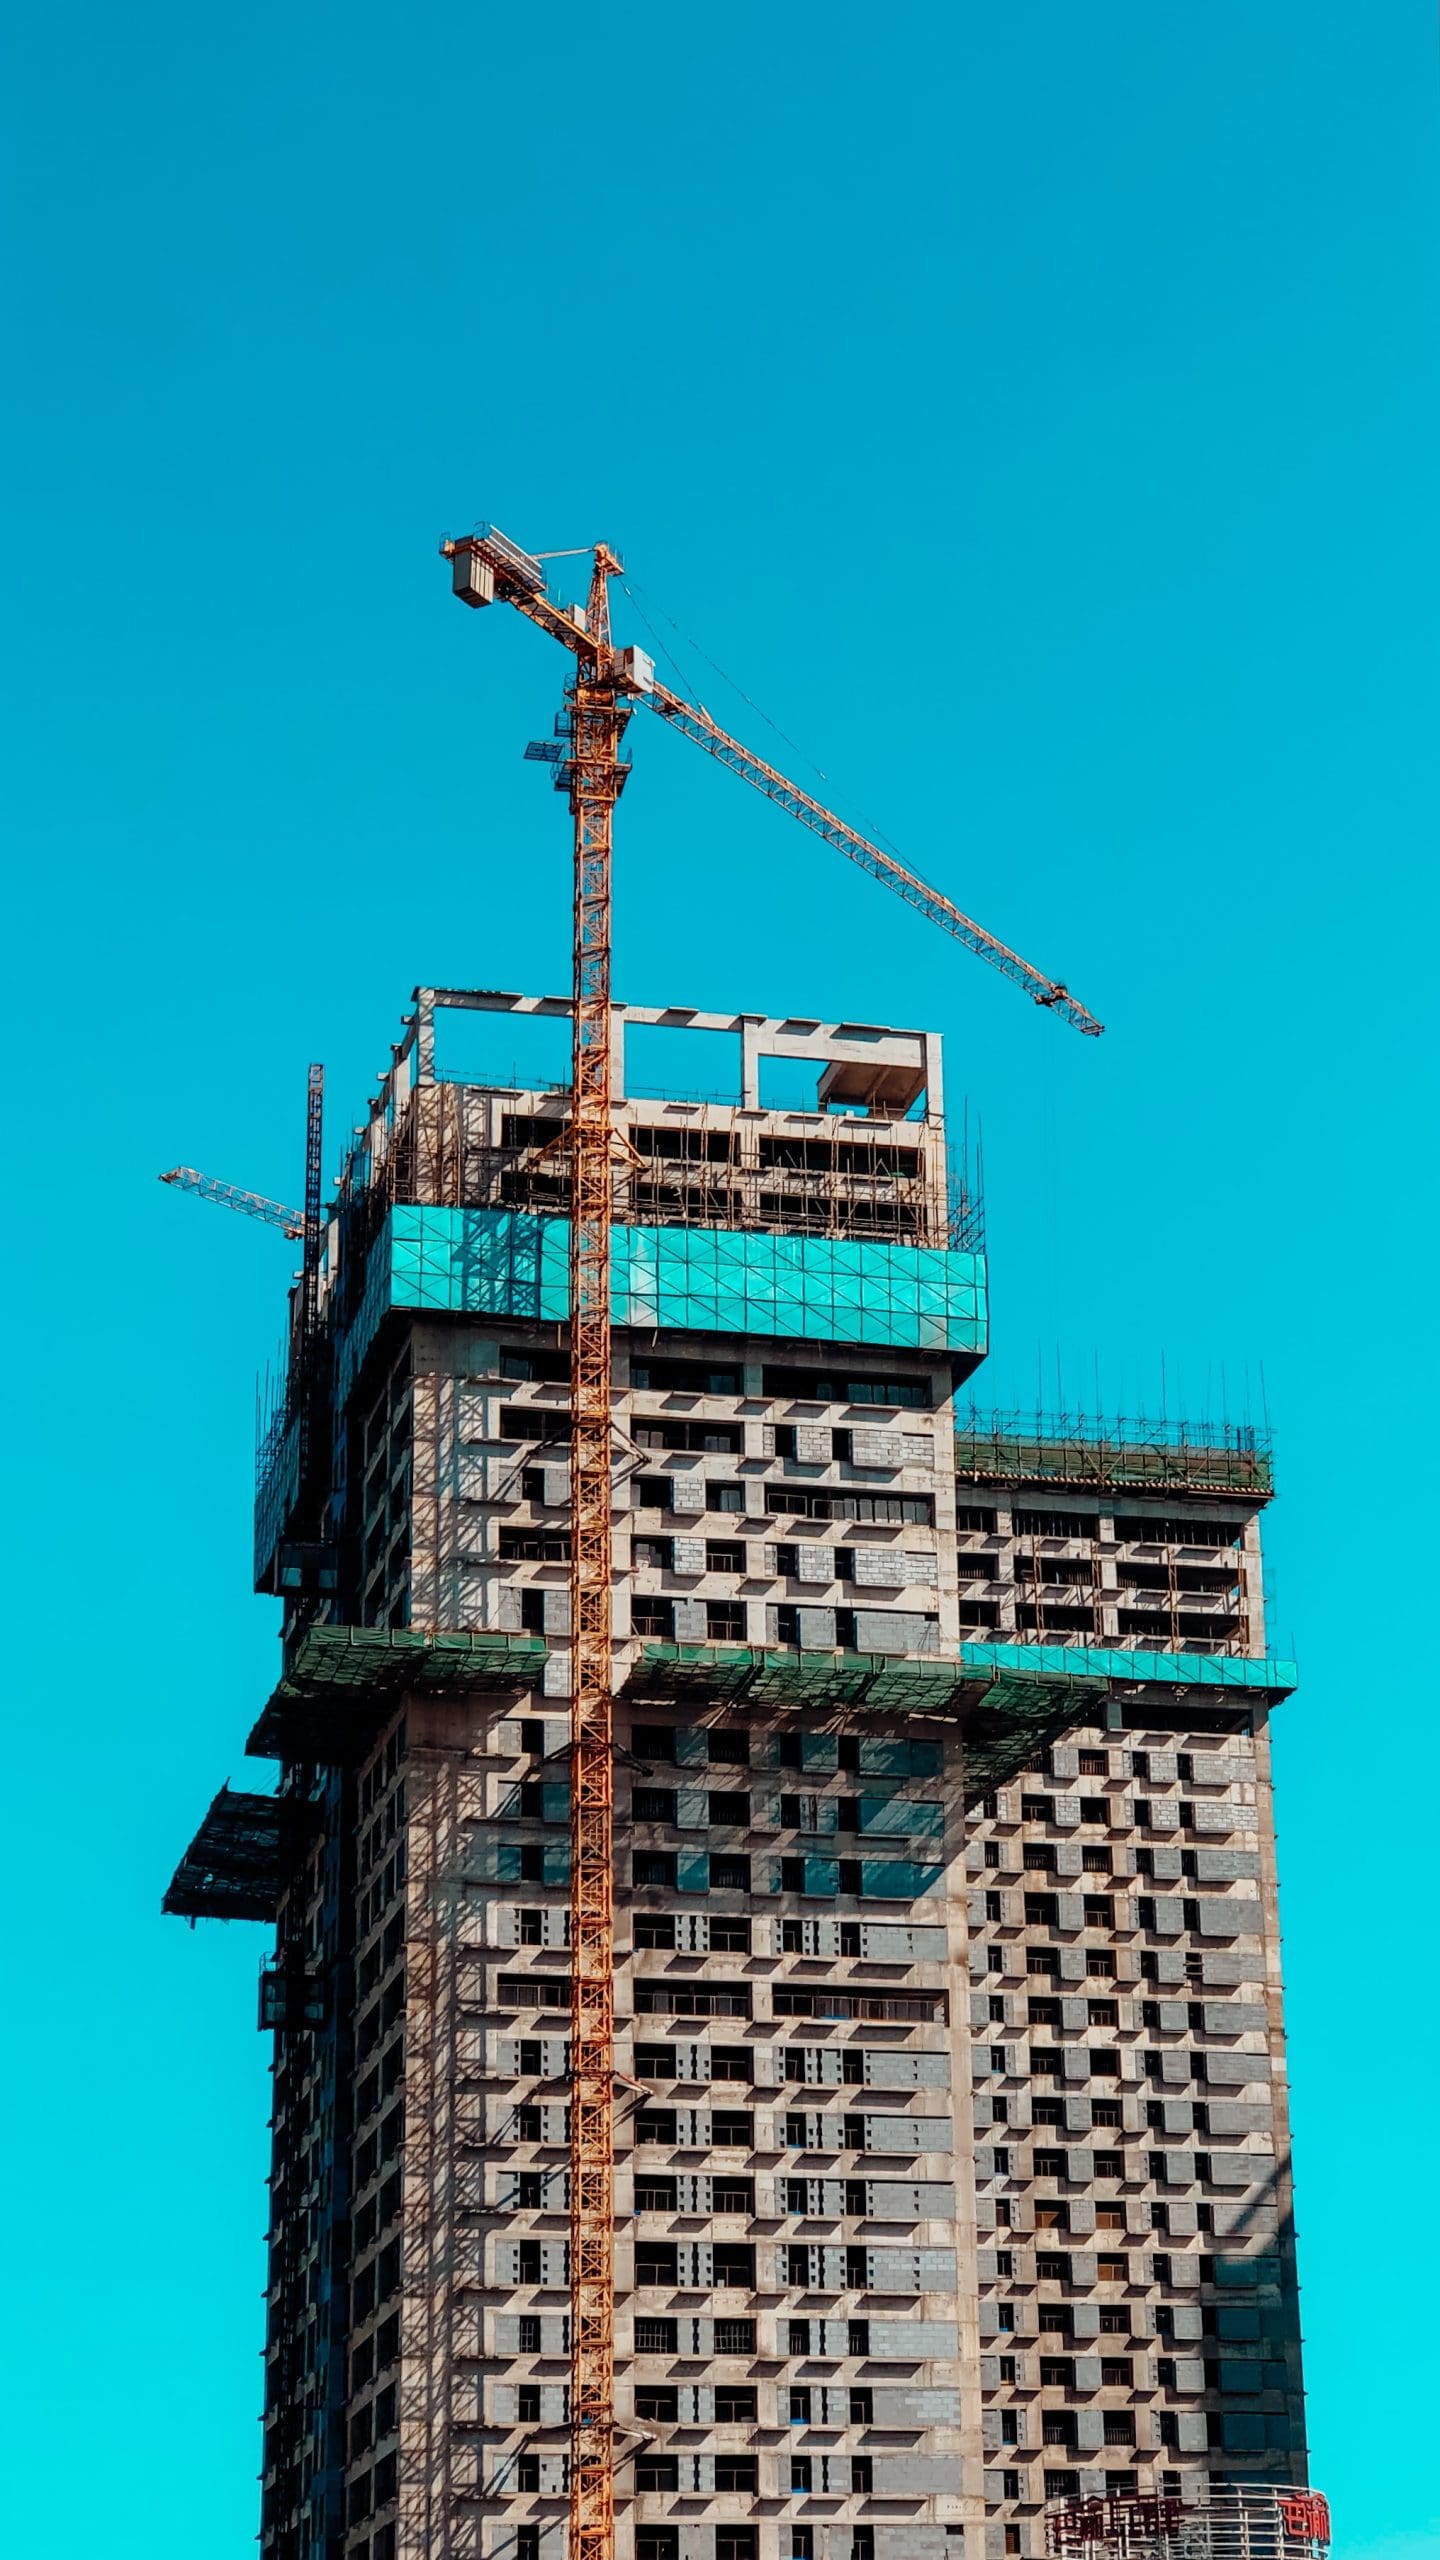 Skyline showing an in progress construction project with crane